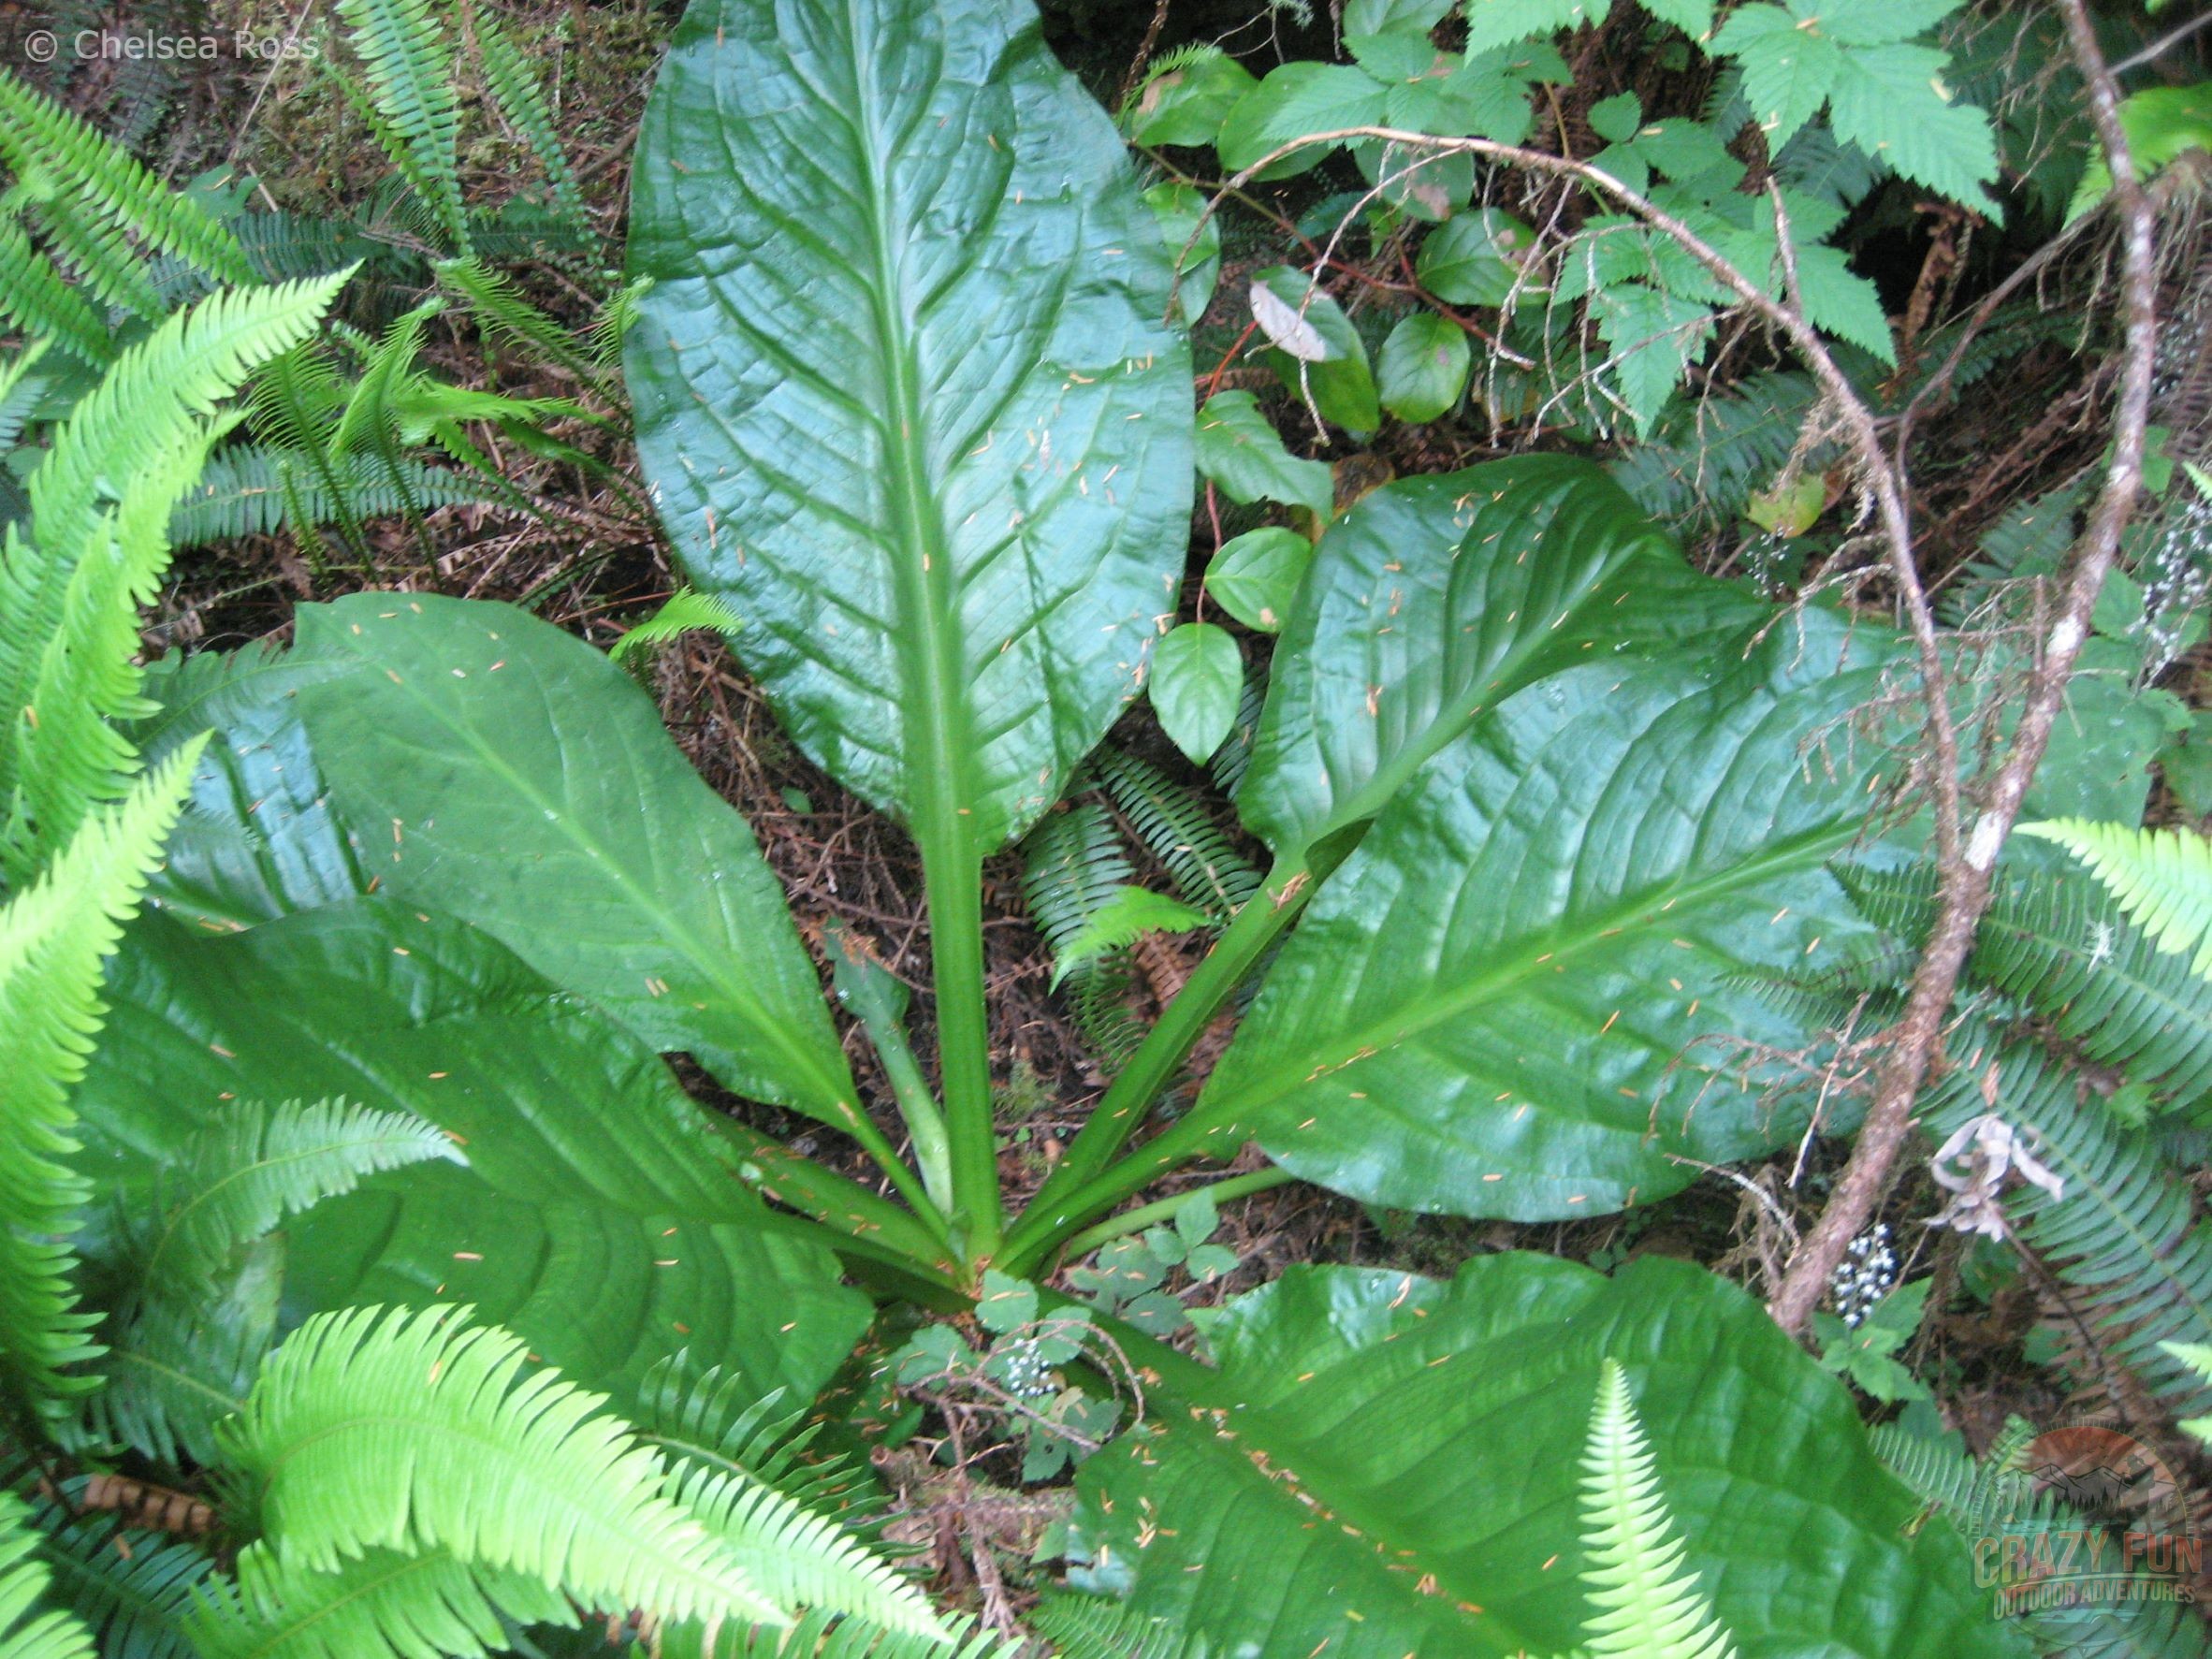 West Coast Trail tips: Enjoy the lush greenery around you. Here there are huge green leaves.